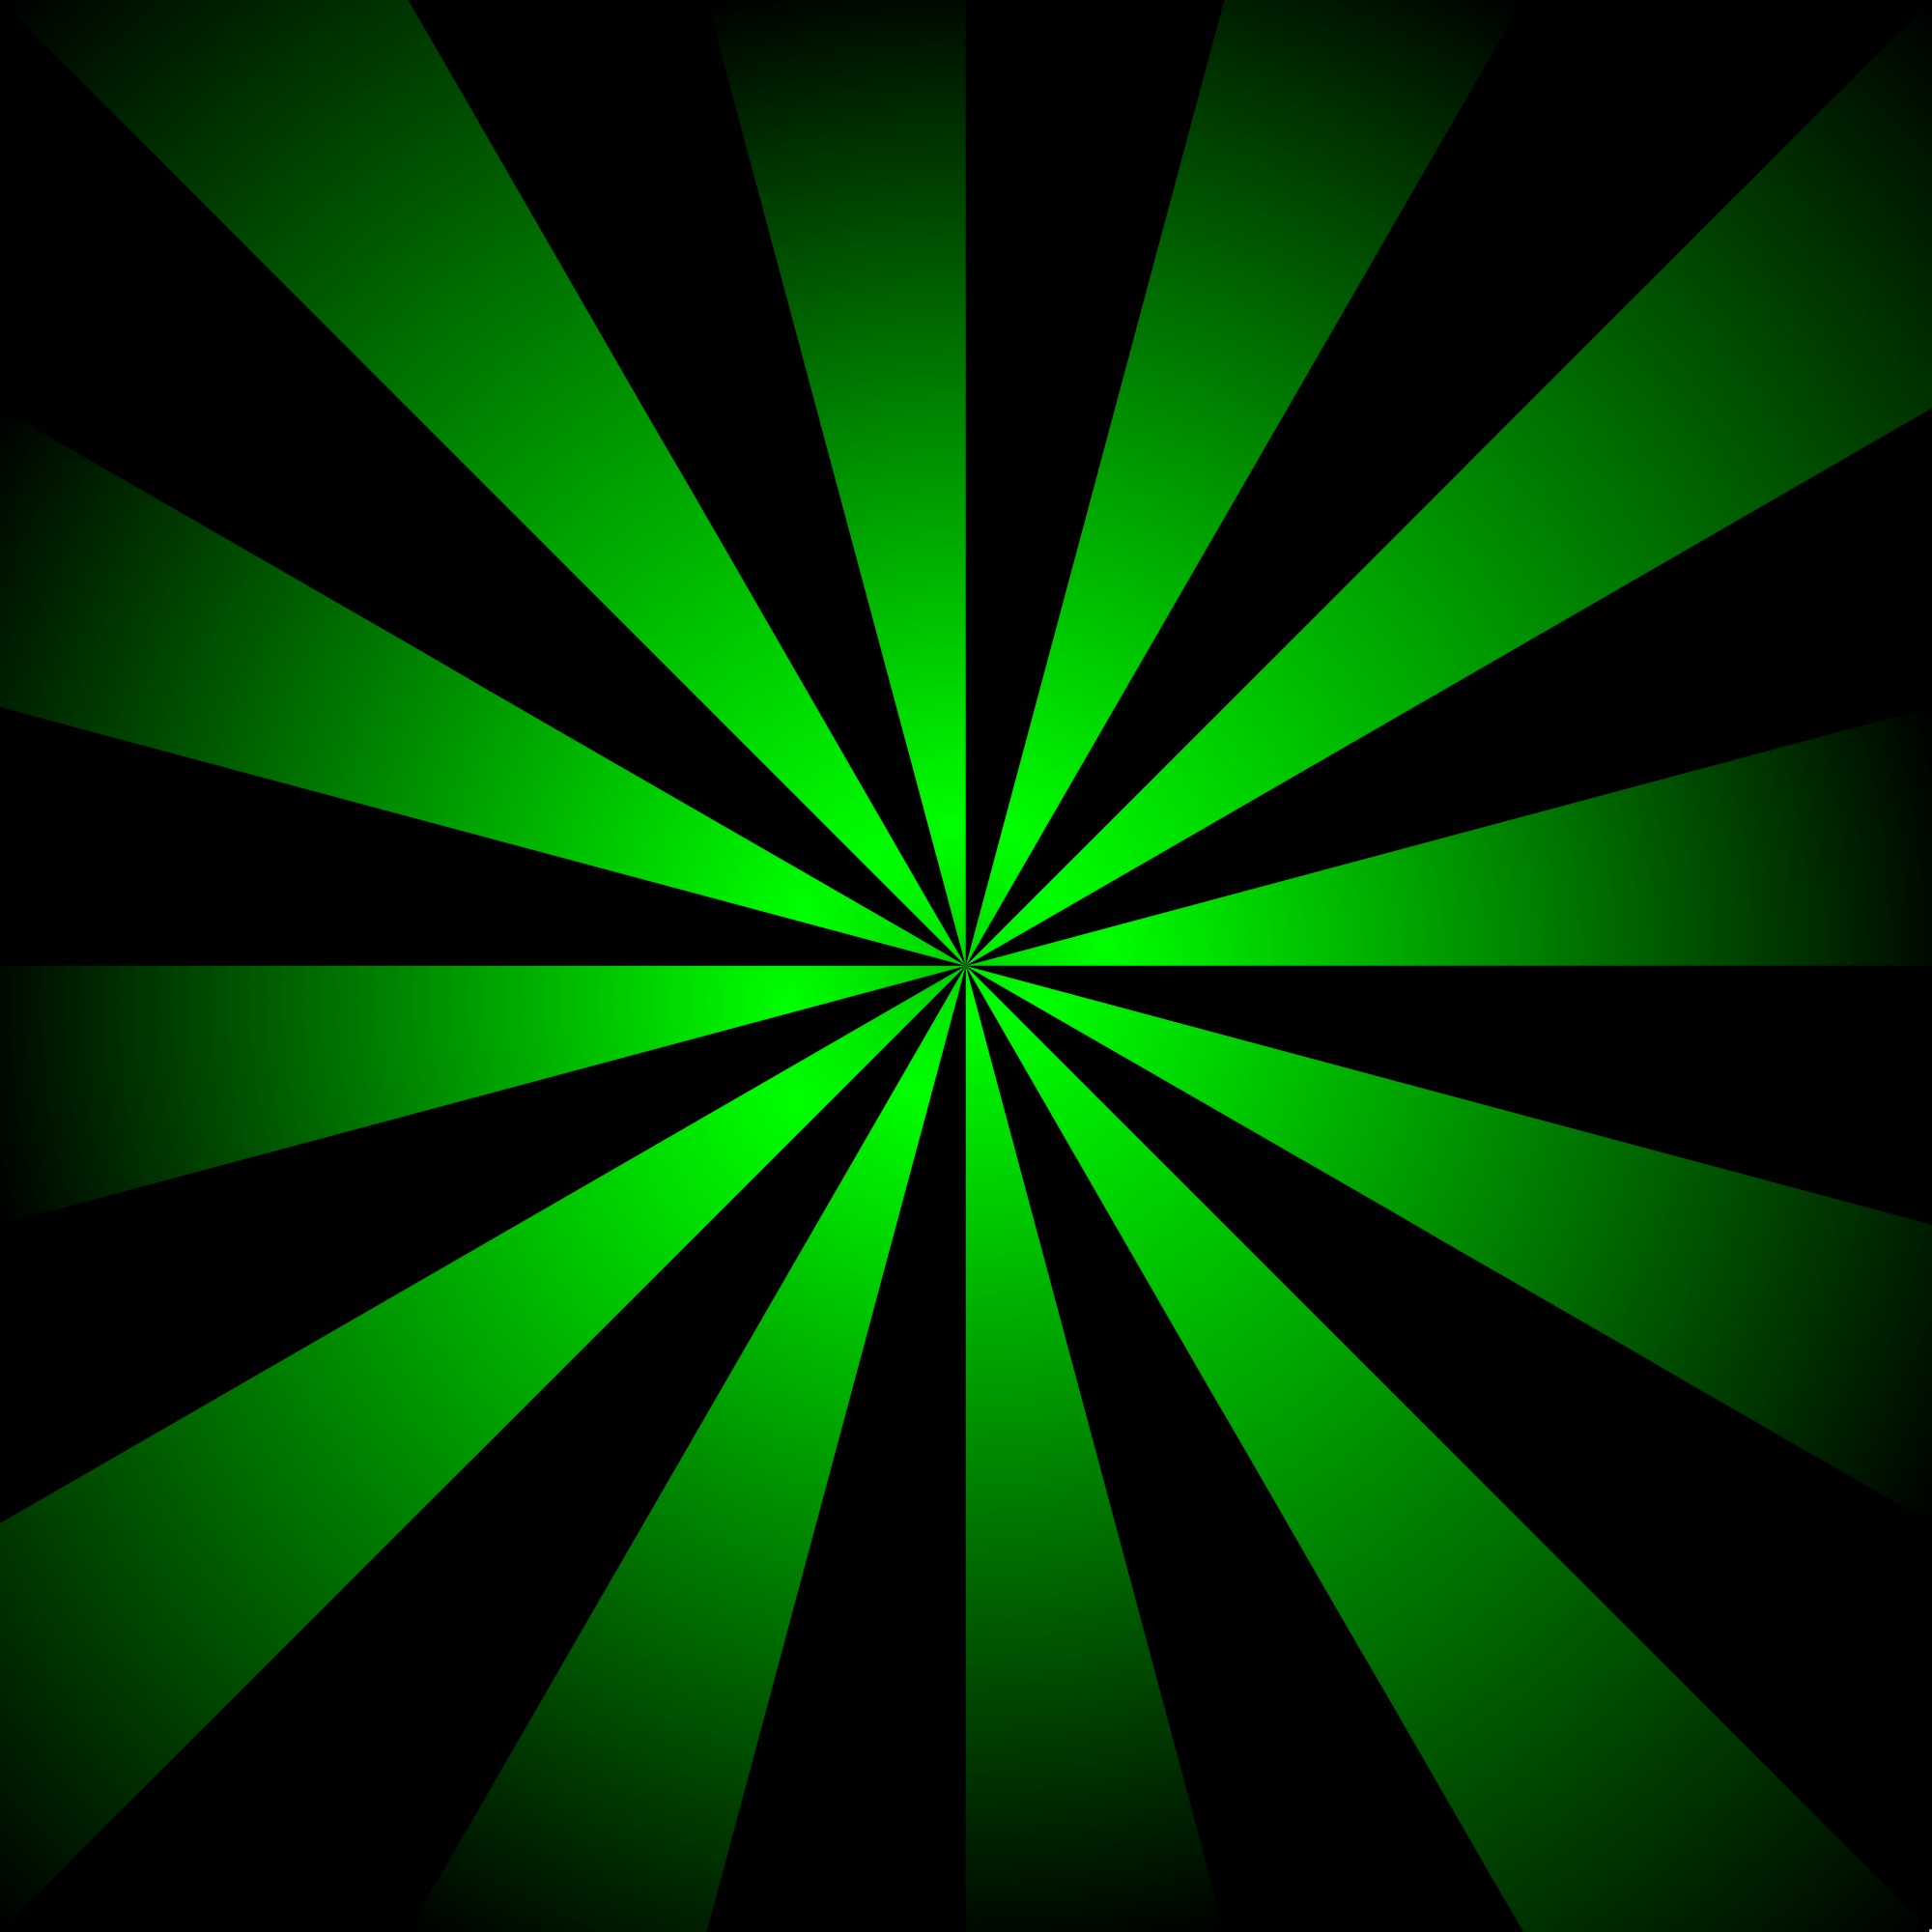 Black and Green background ·① Download free cool High Resolution wallpapers for desktop